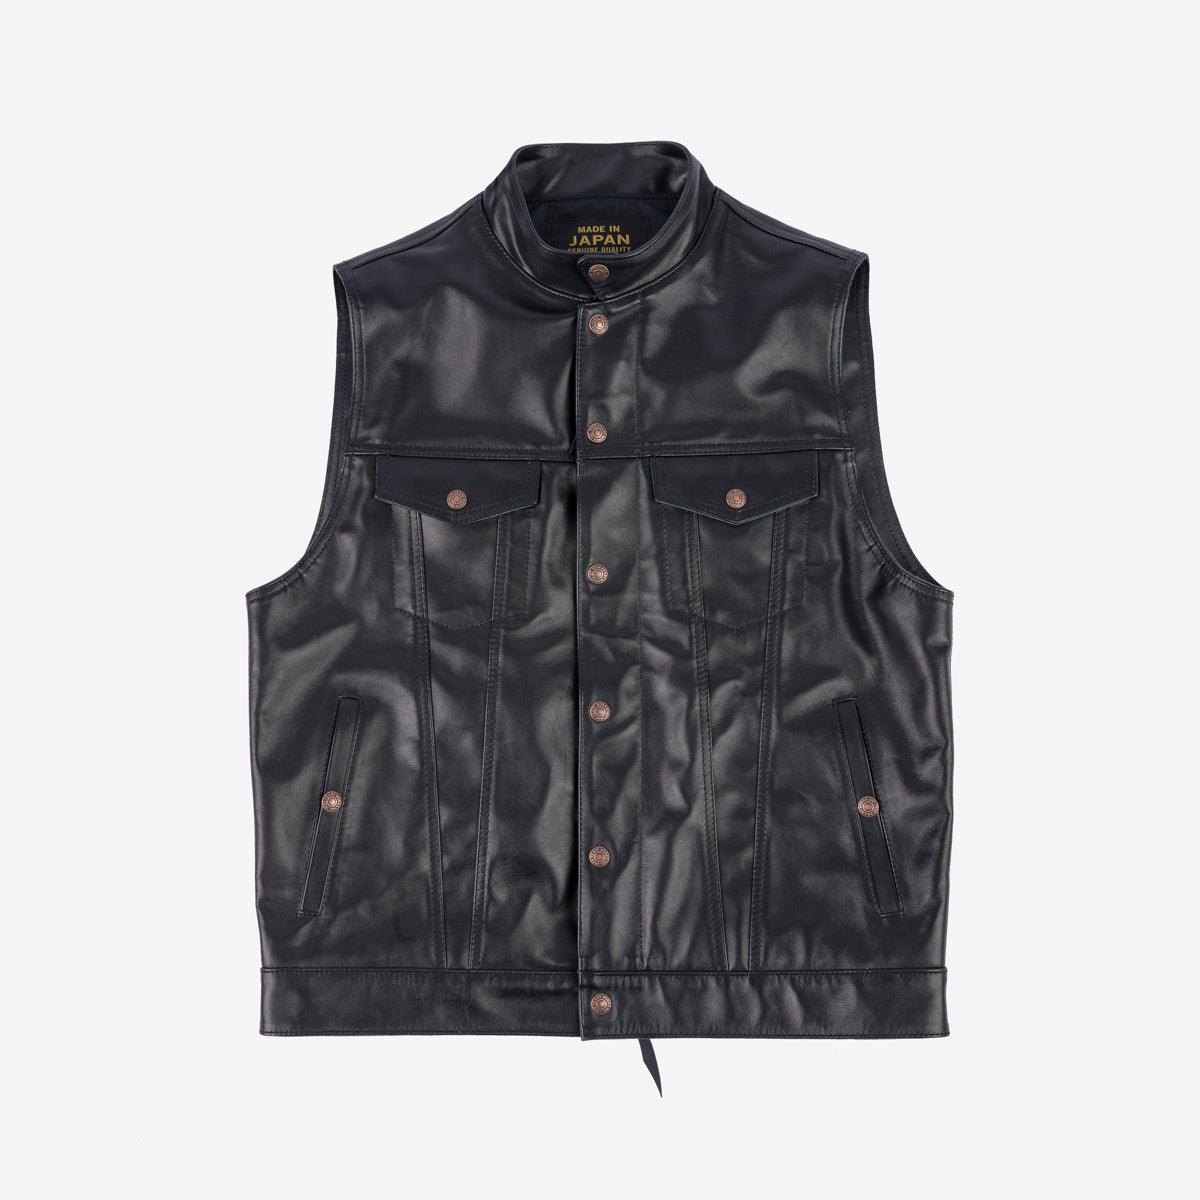 Image showing the IHV-45-BLK - Japanese Steerhide Modified Type III Vest - Black which is a Vests described by the following info FW23, Iron Heart, LEATHER JACKETS, Tops, Vests and sold on the IRON HEART GERMANY online store